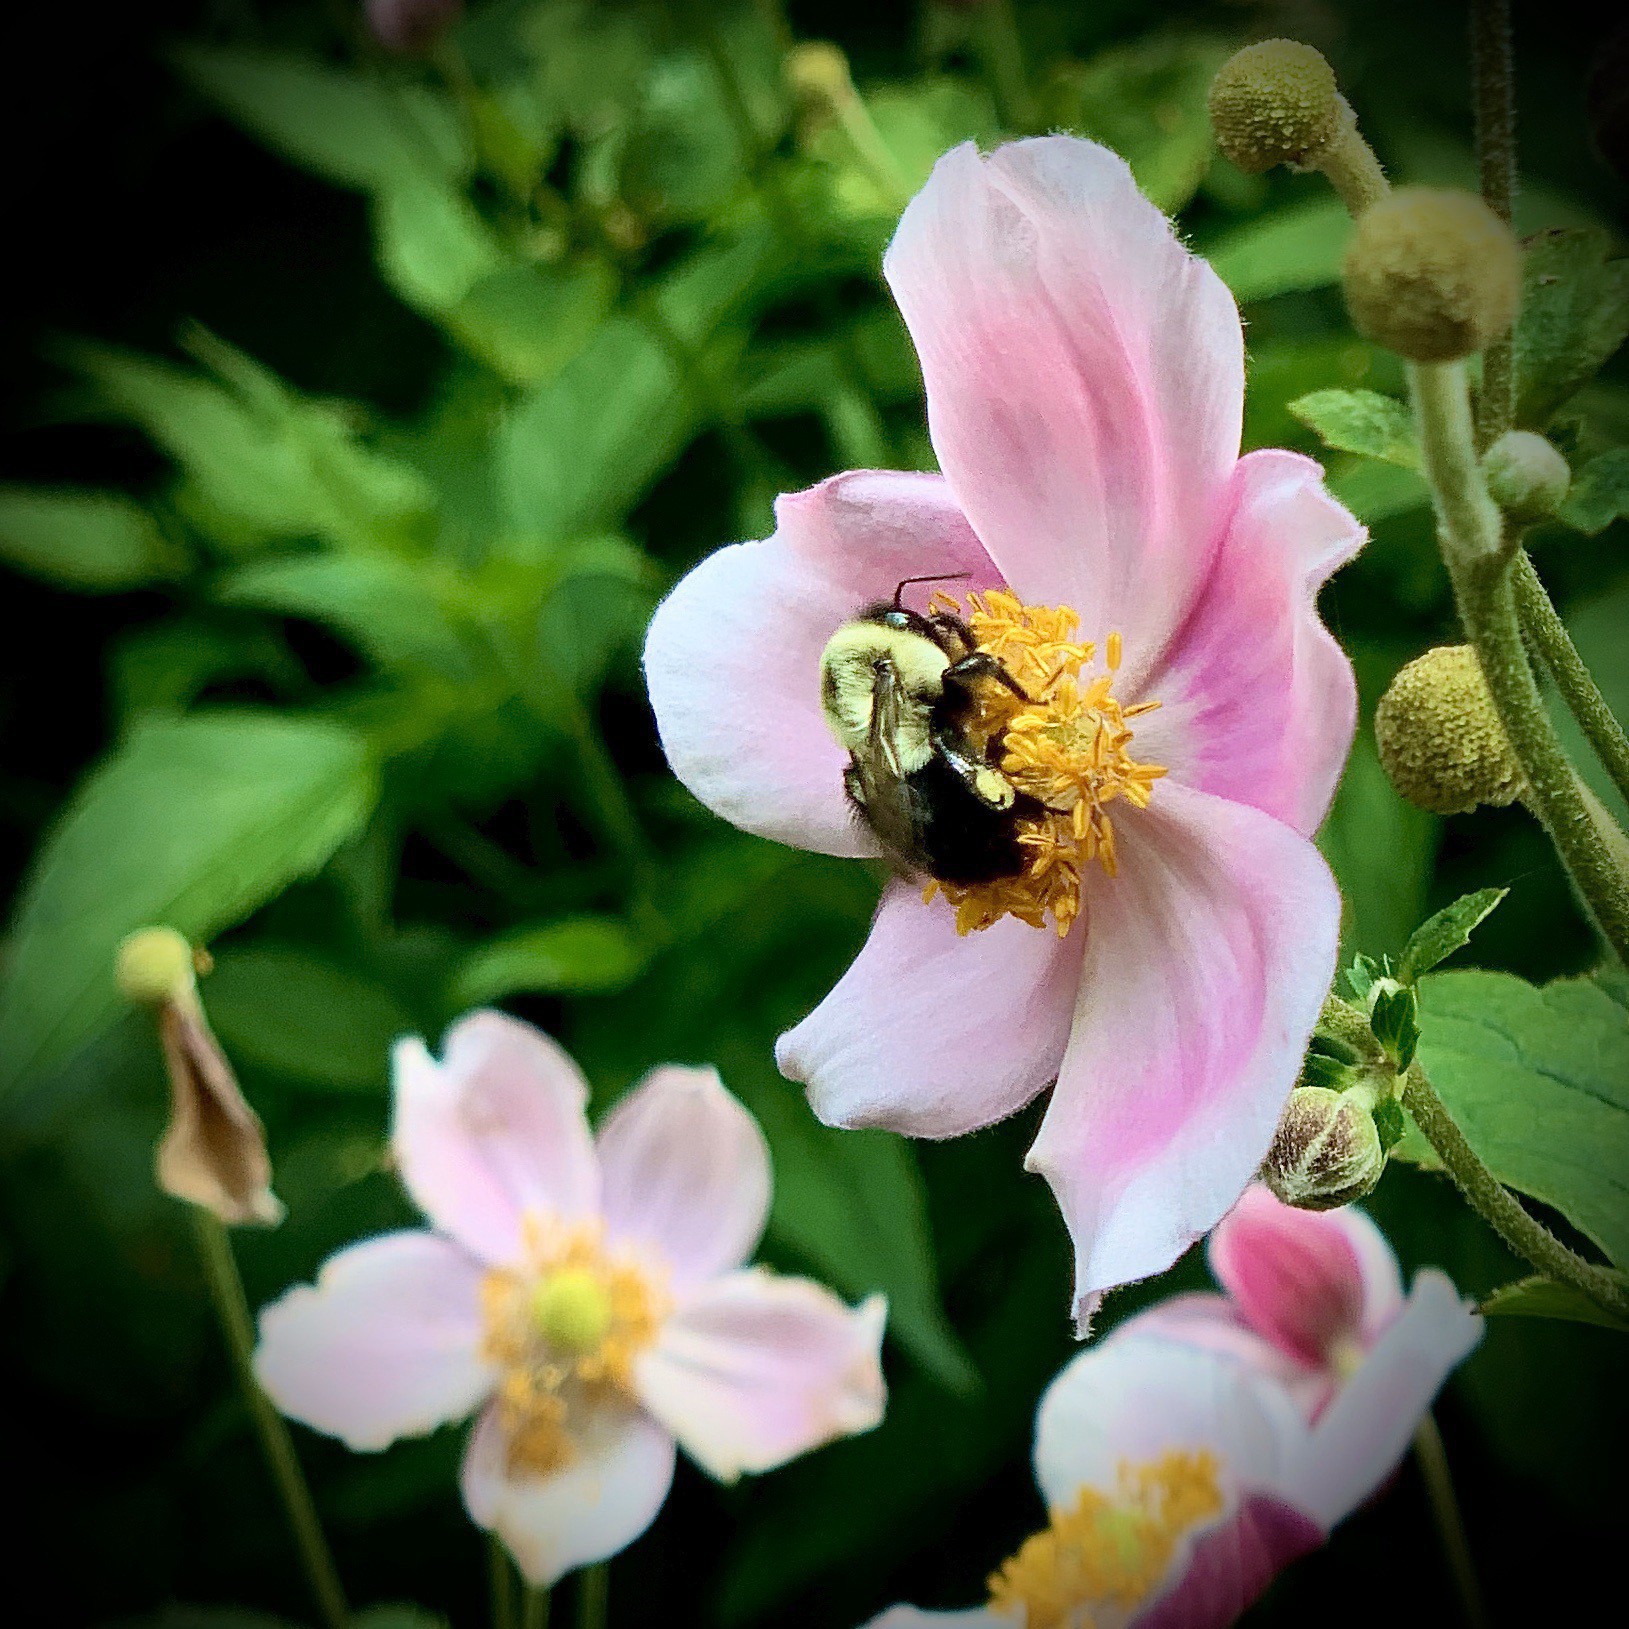 Closeup of a bee pollenating a flower.